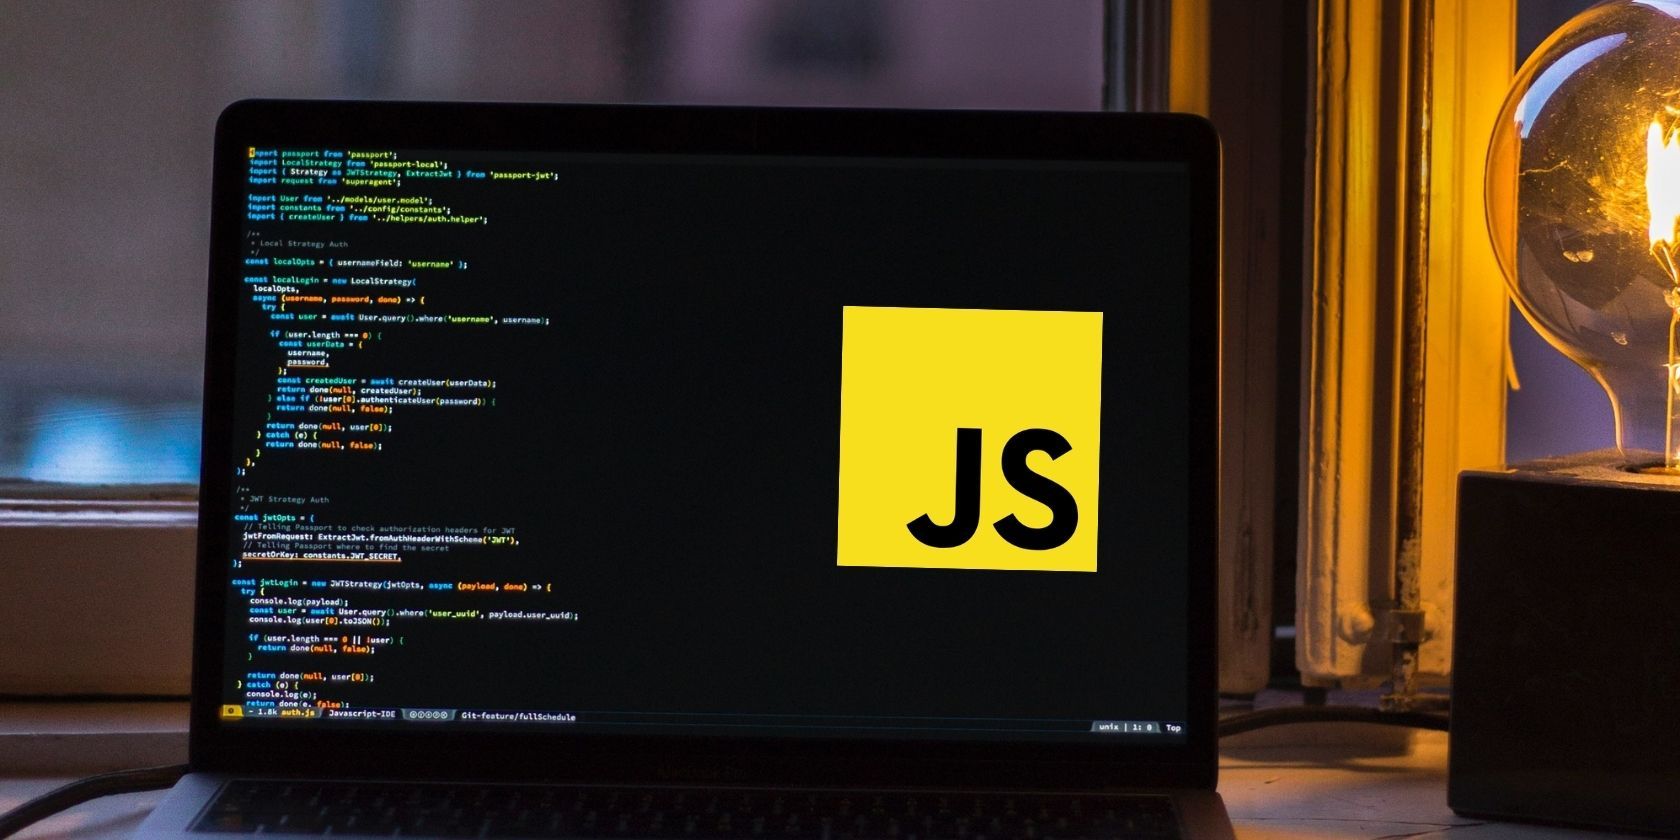 Picture of a laptop showing JS logo